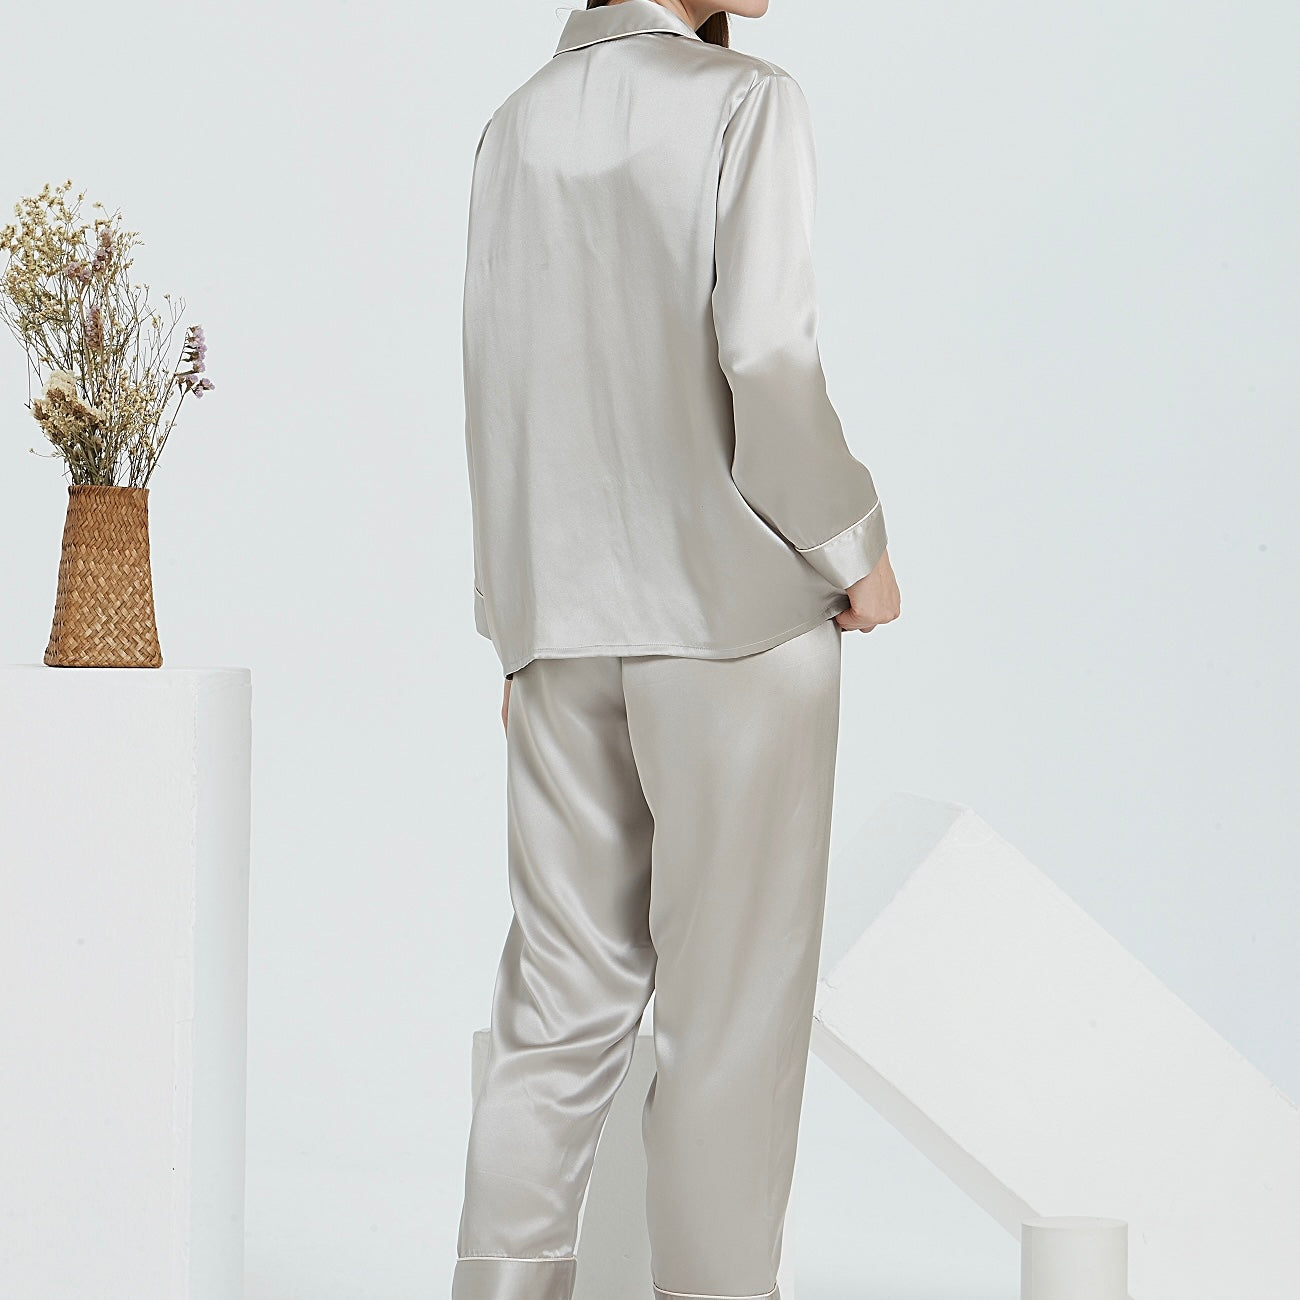 White Trousseau’s Pure Mulberry Silk Long Pyjamas Set in Silver. High quality and breathable, our silk pyjamas set will make you feel stylish while lounging at home. It is the best sleepwear for Singapore weather!